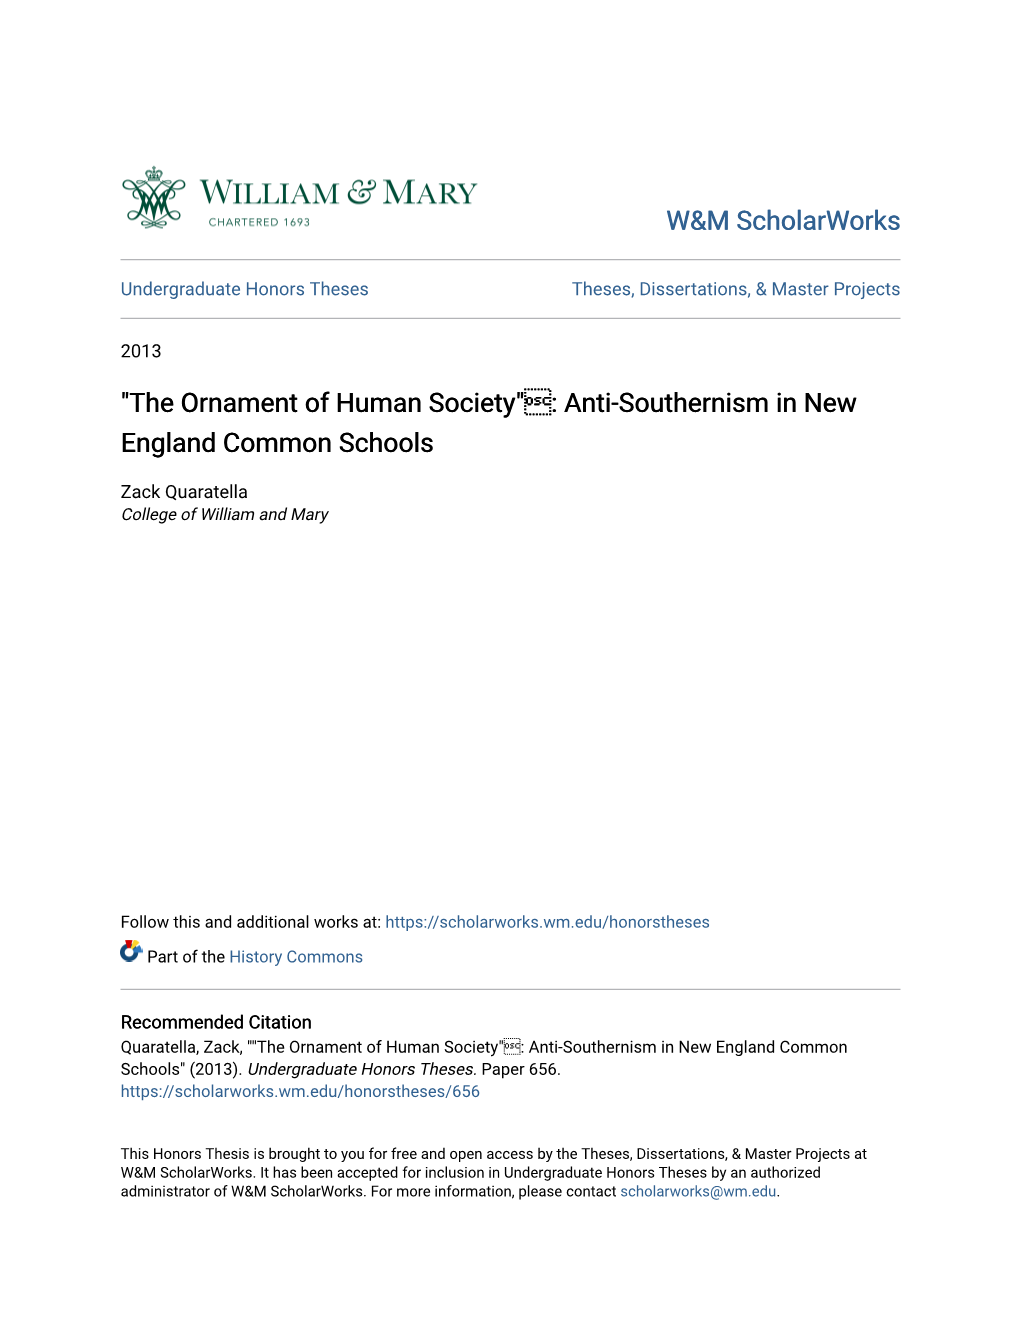 The Ornament of Human Society": Anti-Southernism in New England Common Schools